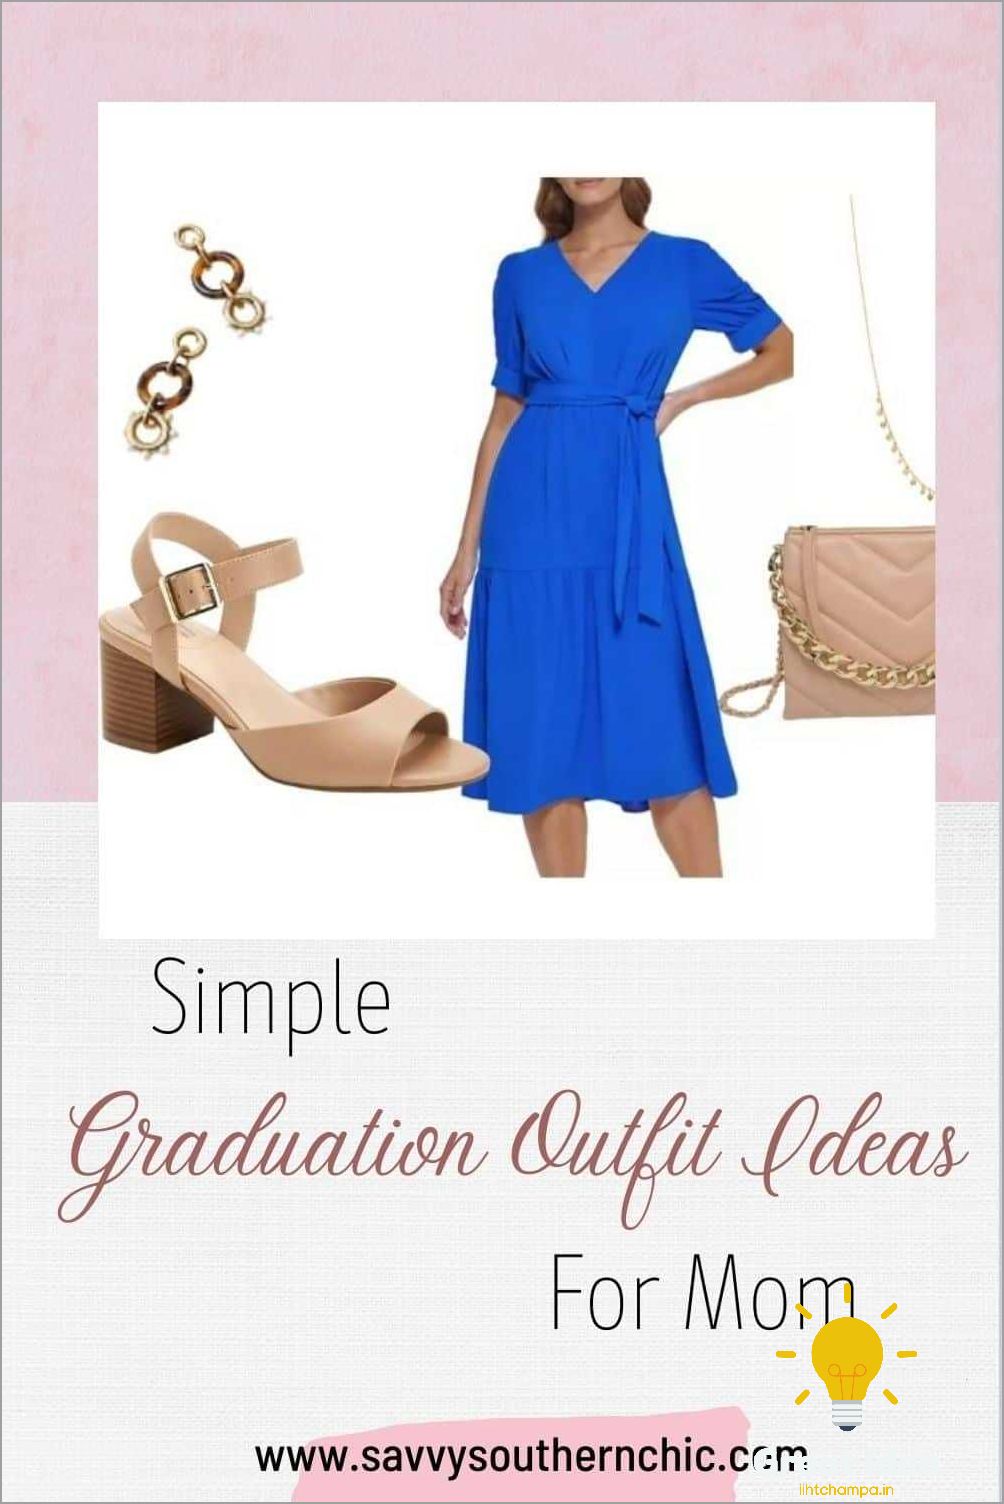 stylish outfit ideas for moms to wear to graduatio